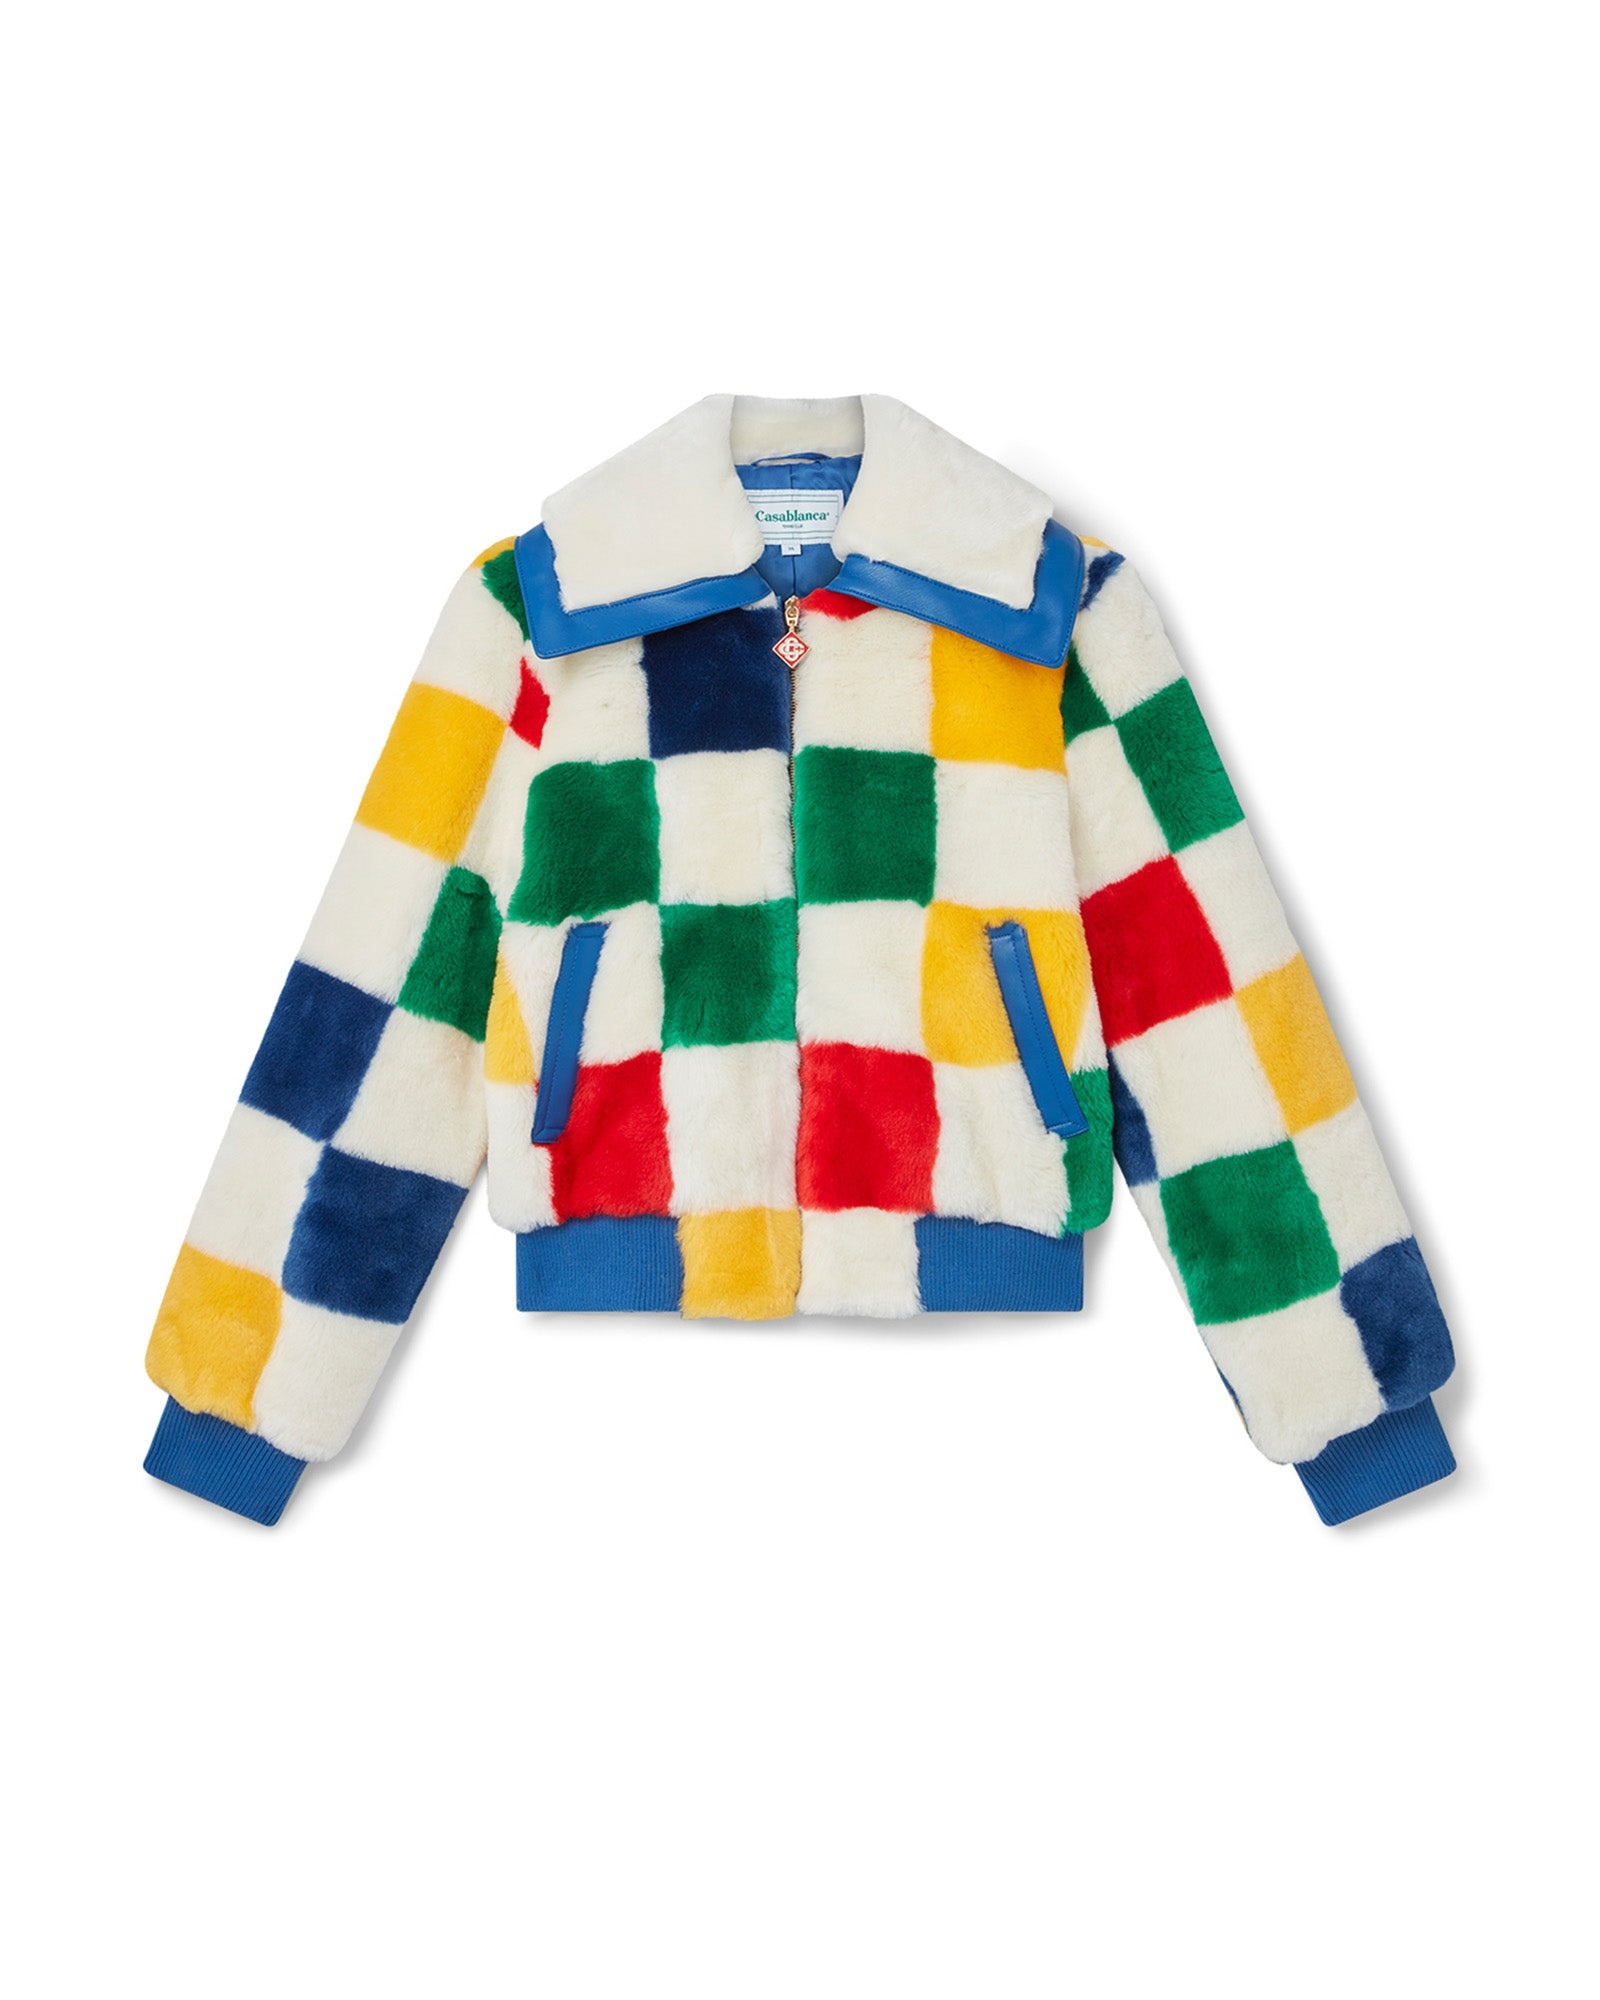 Primary Check Jacket - 1